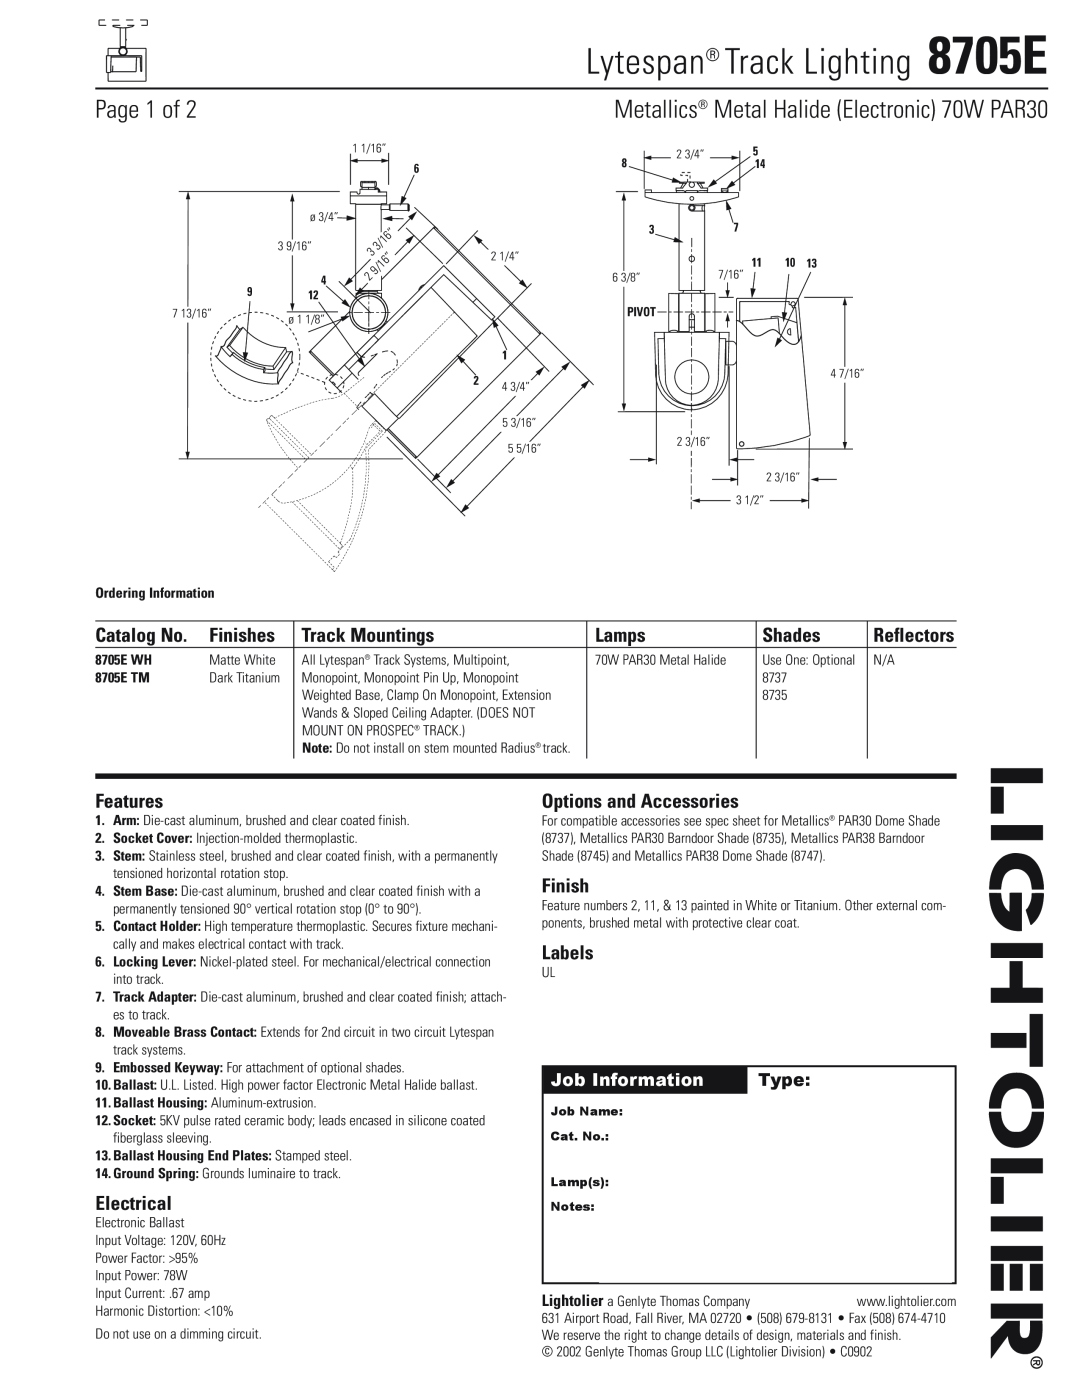 Lightolier manual Lytespan Track Lighting 8705E, Page 1 of, Catalog No, Finishes, Track Mountings, Lamps, Shades 